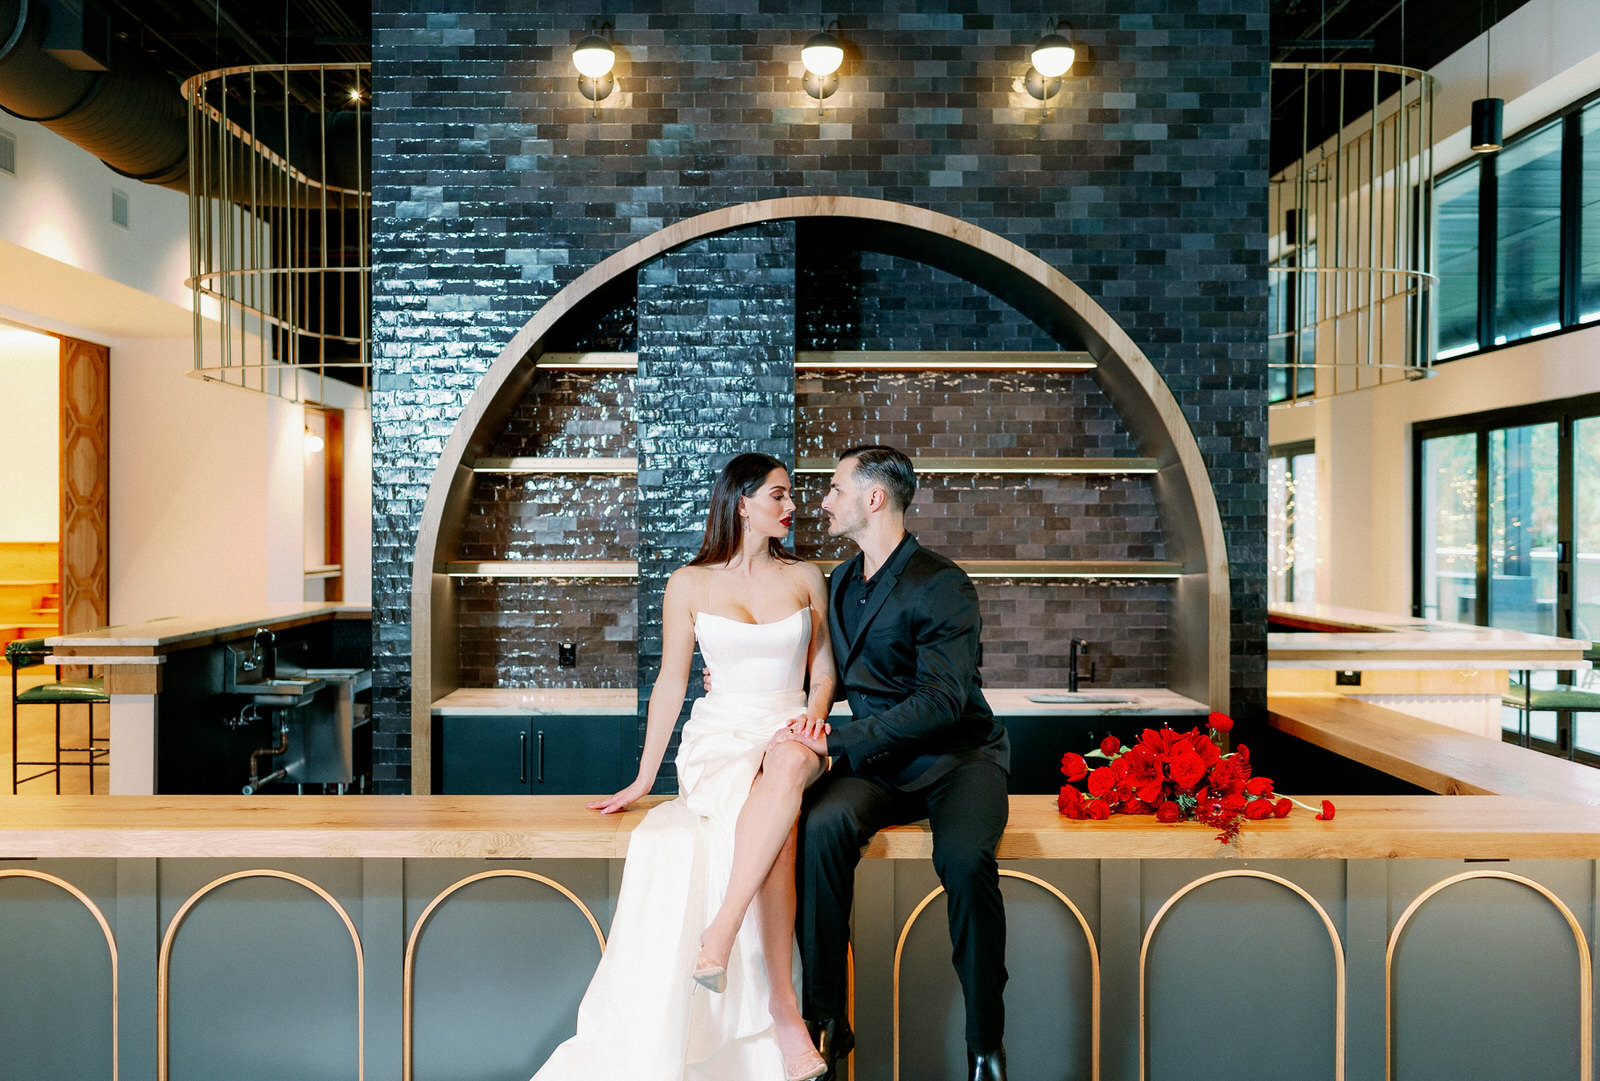 Modern Indoor South Tampa Wedding Space at Tampa Wedding Venue Hyde House | Dramatic Modern Ines di Santo High Slit Wedding Dress by Isabel Oneil Bridal | Groom in All Black Suit | Modern Dramatic Unique Asymmetrical Red Wedding Bridal Bouquet with Ranunculus Tulips Protea Roses Anemone and Amaryllis